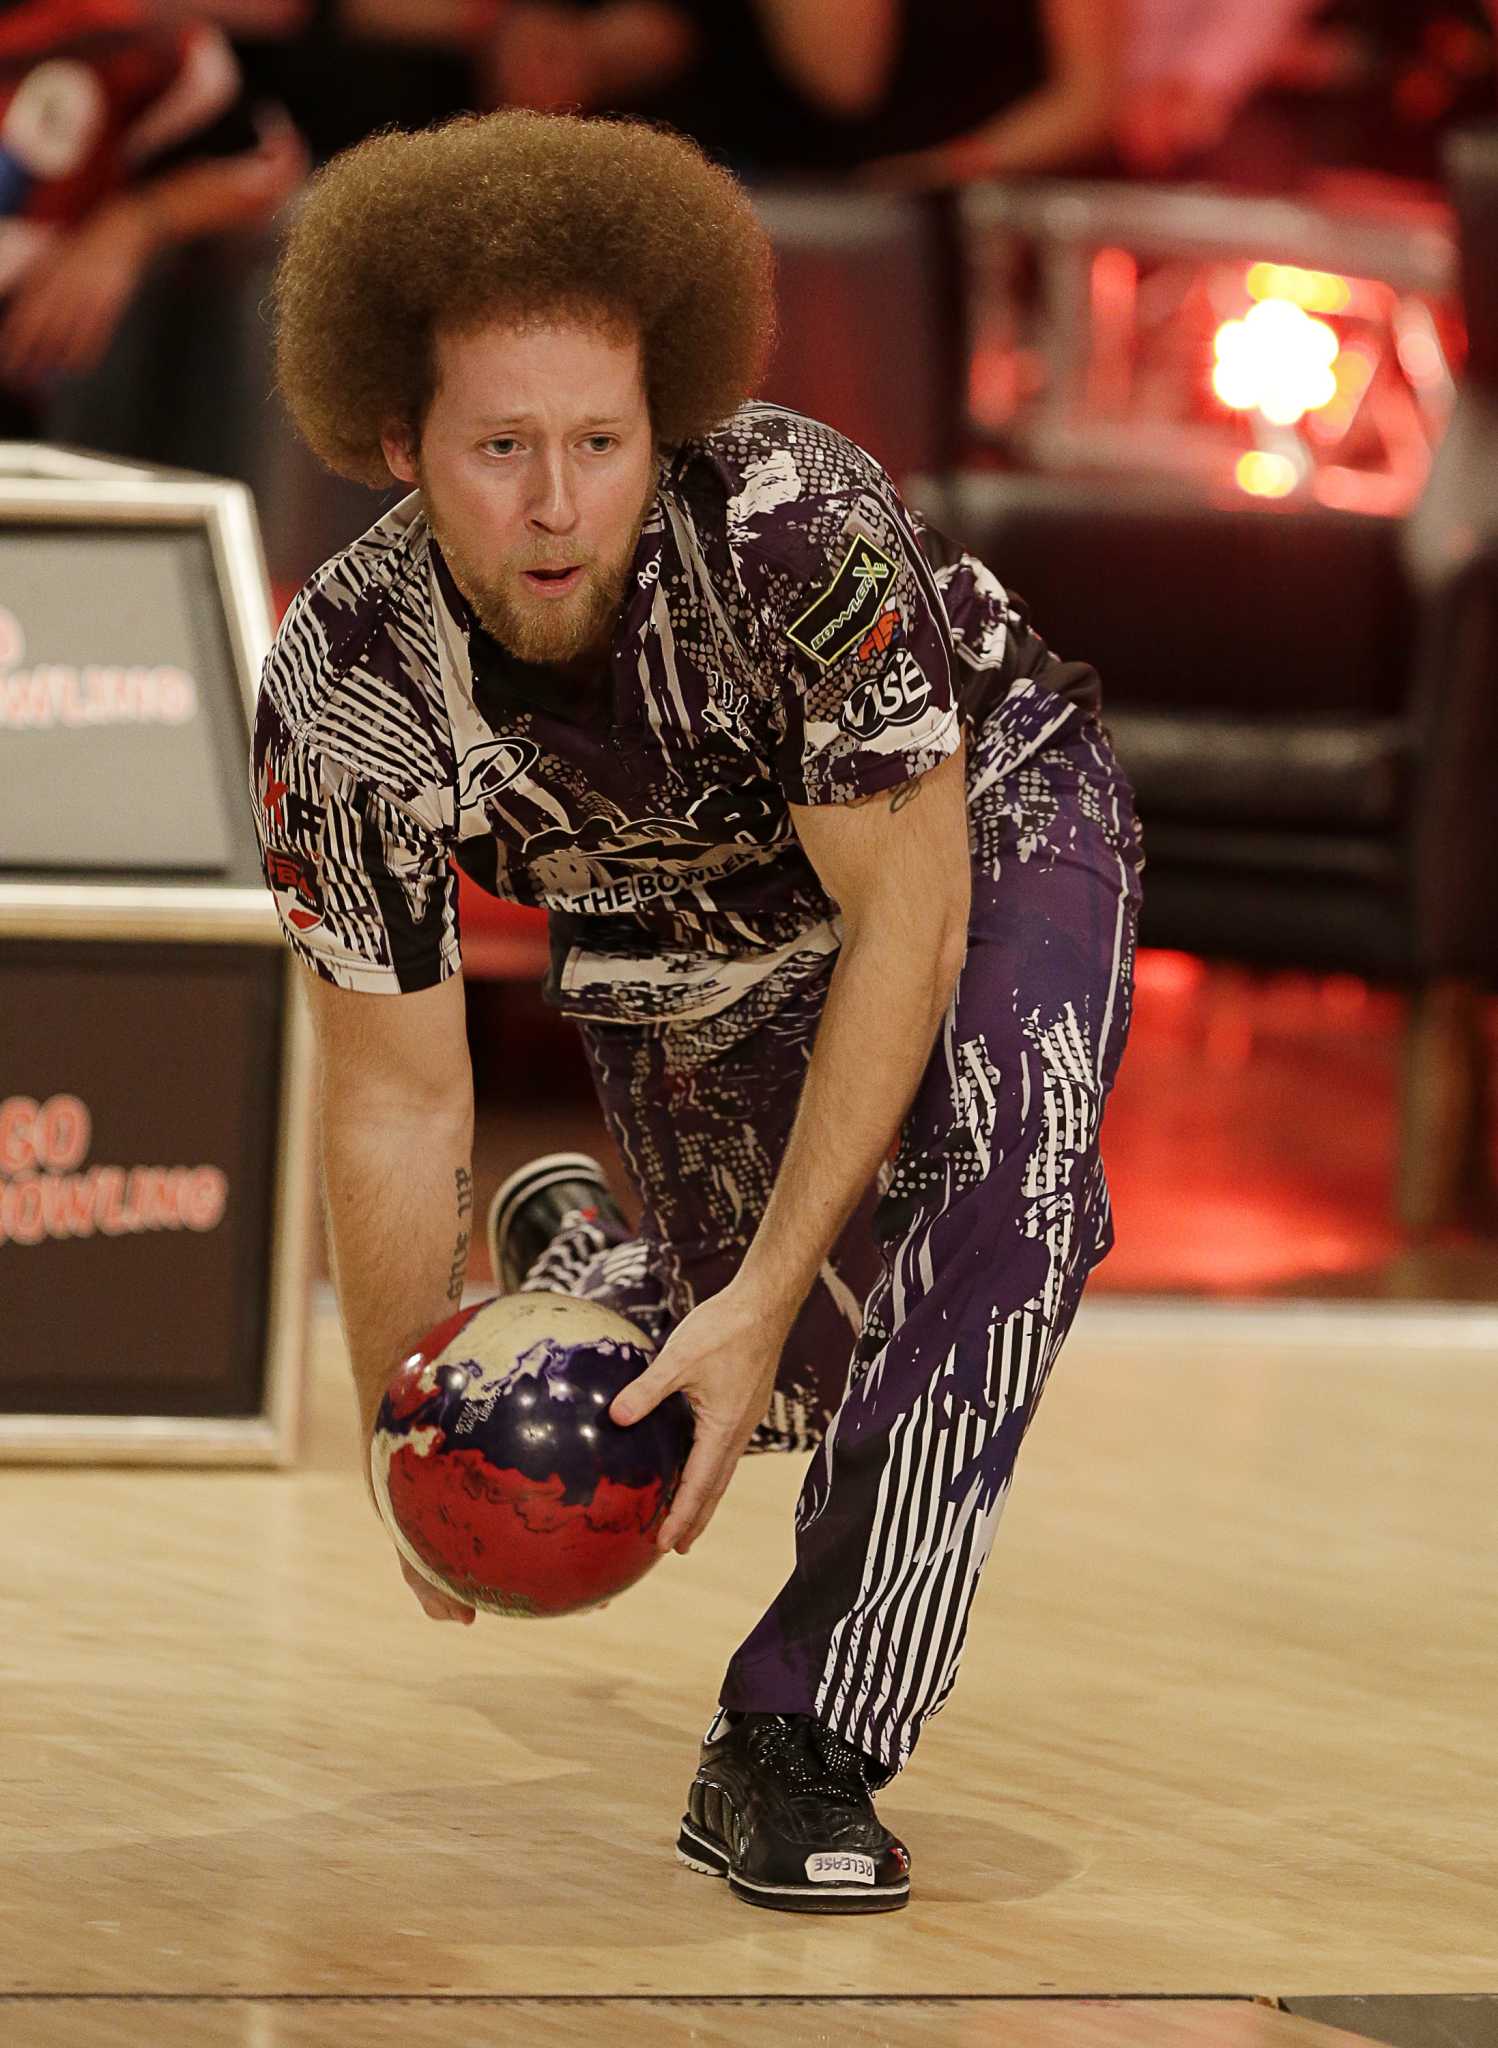 Live bowling returns to TV on June 6